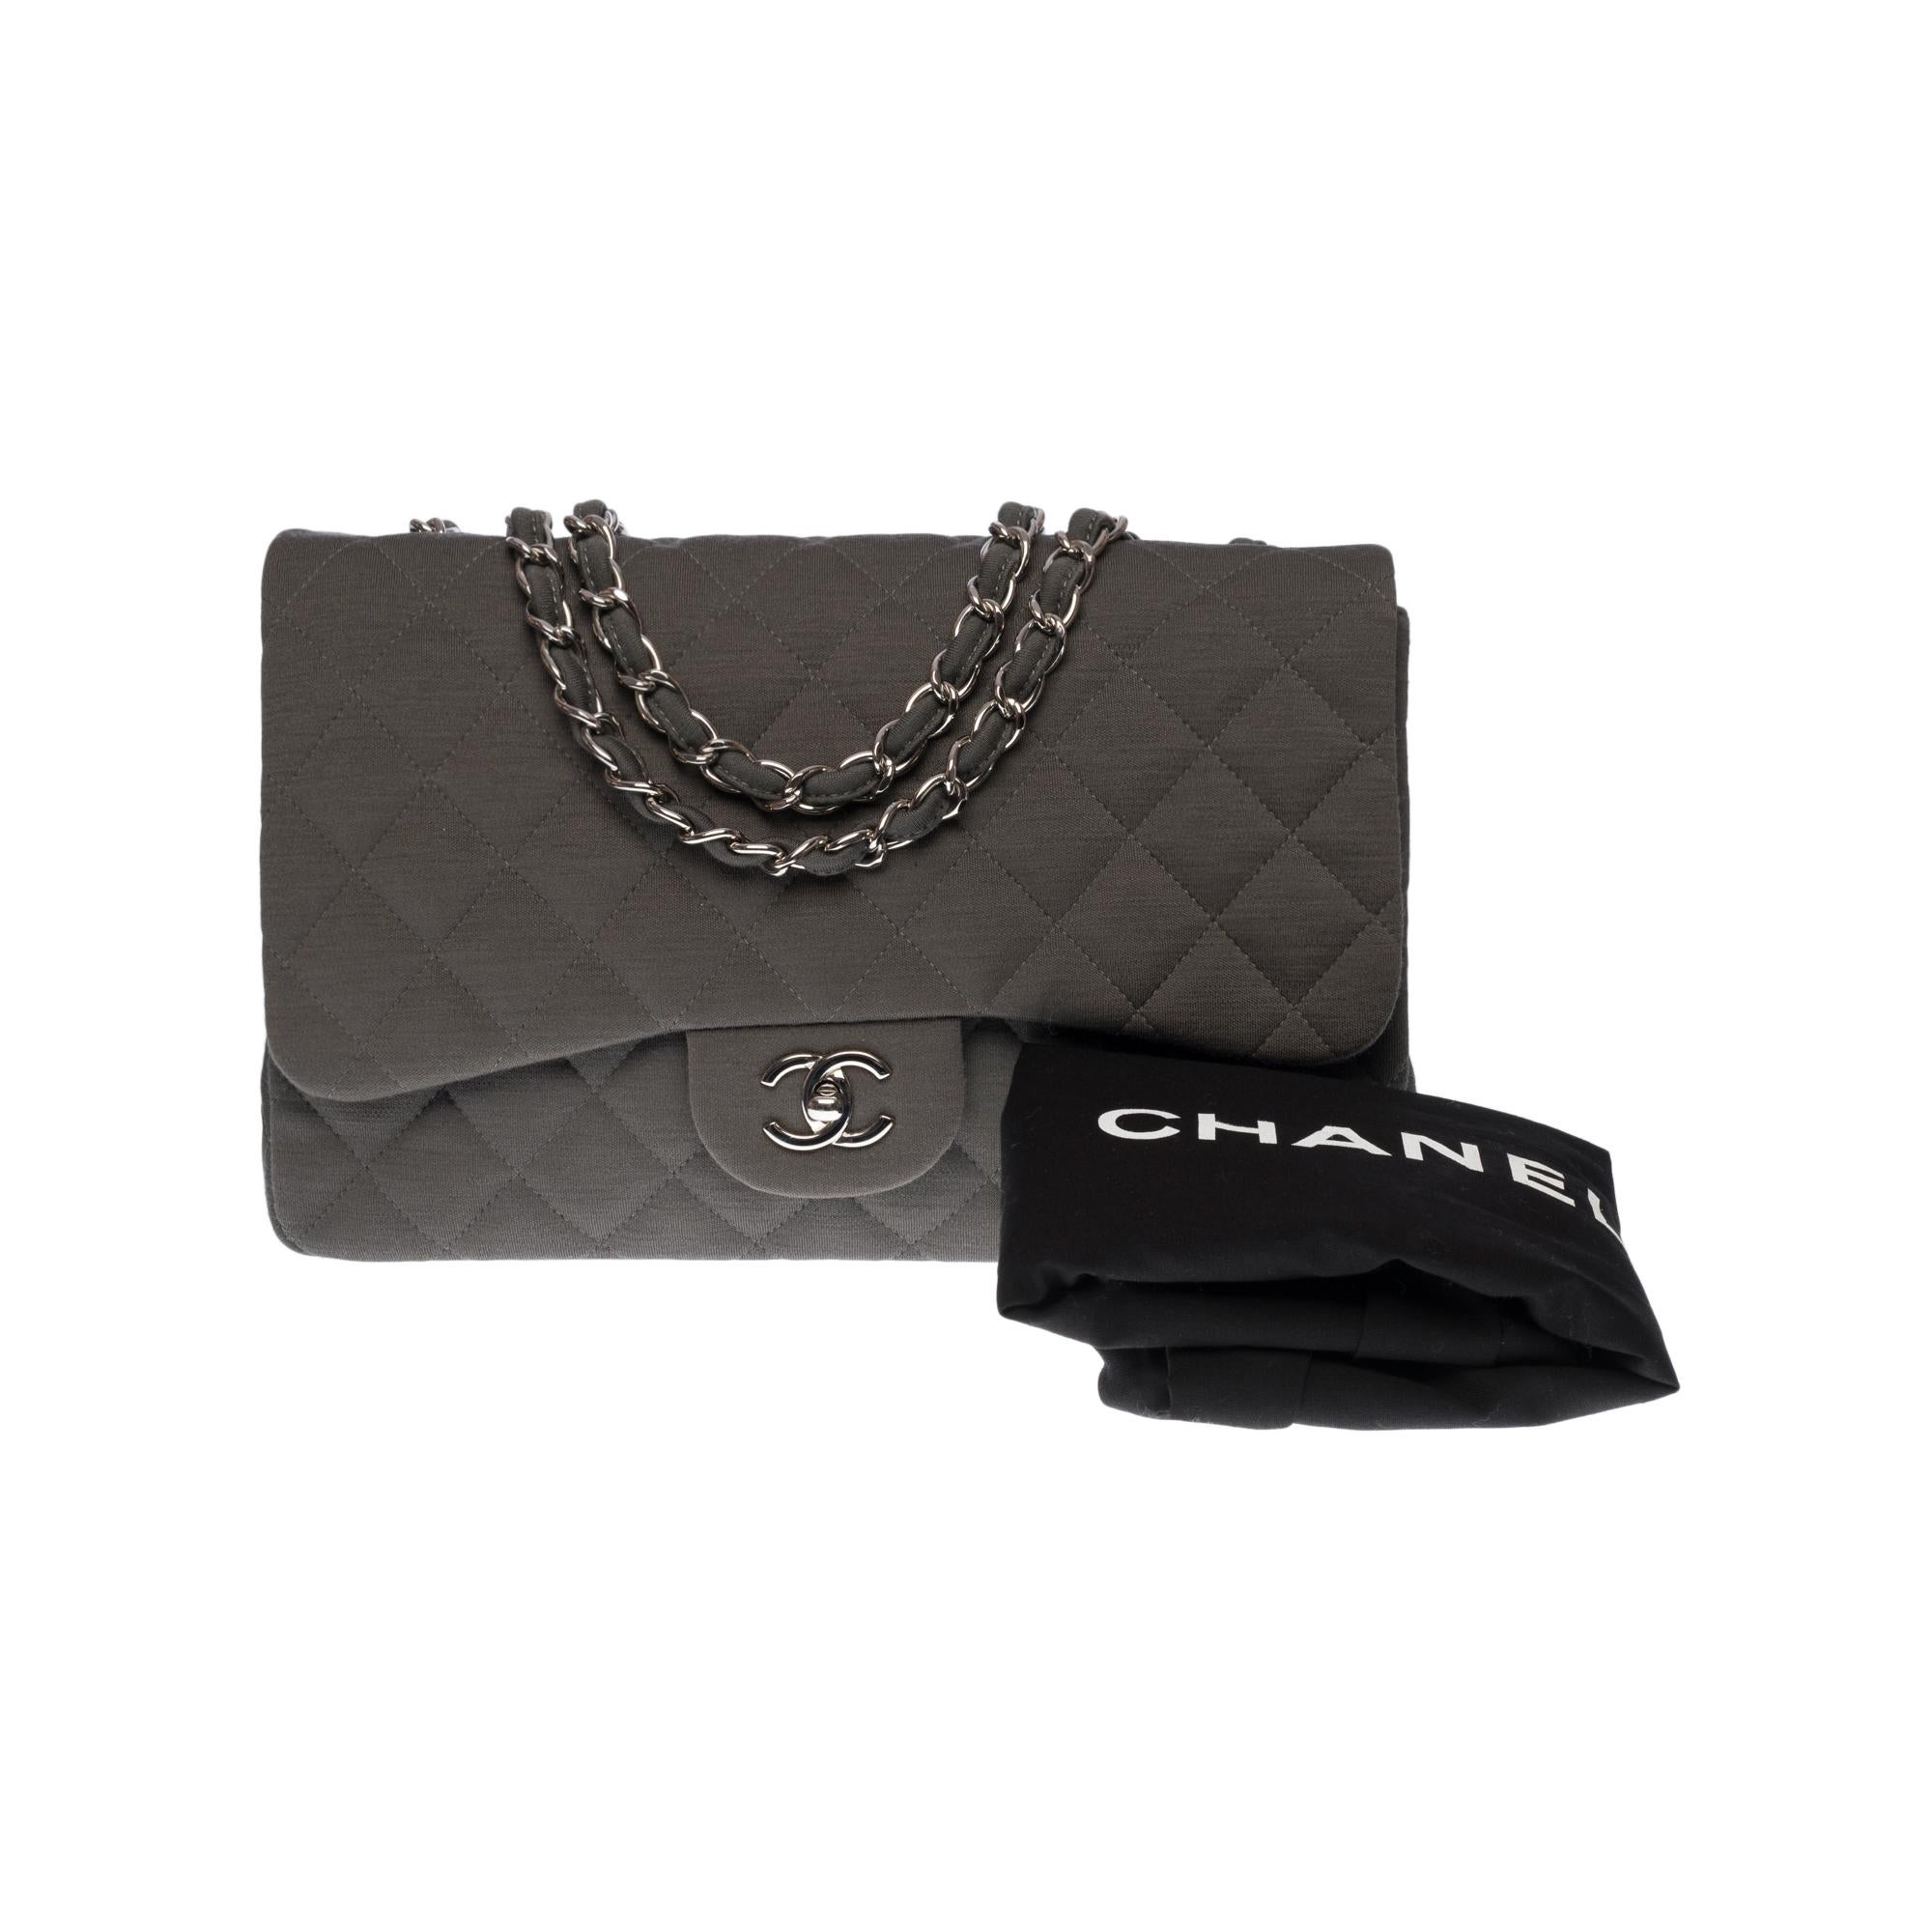 Chanel Timeless Jumbo single flap shoulder bag in grey quilted jersey, SHW 5